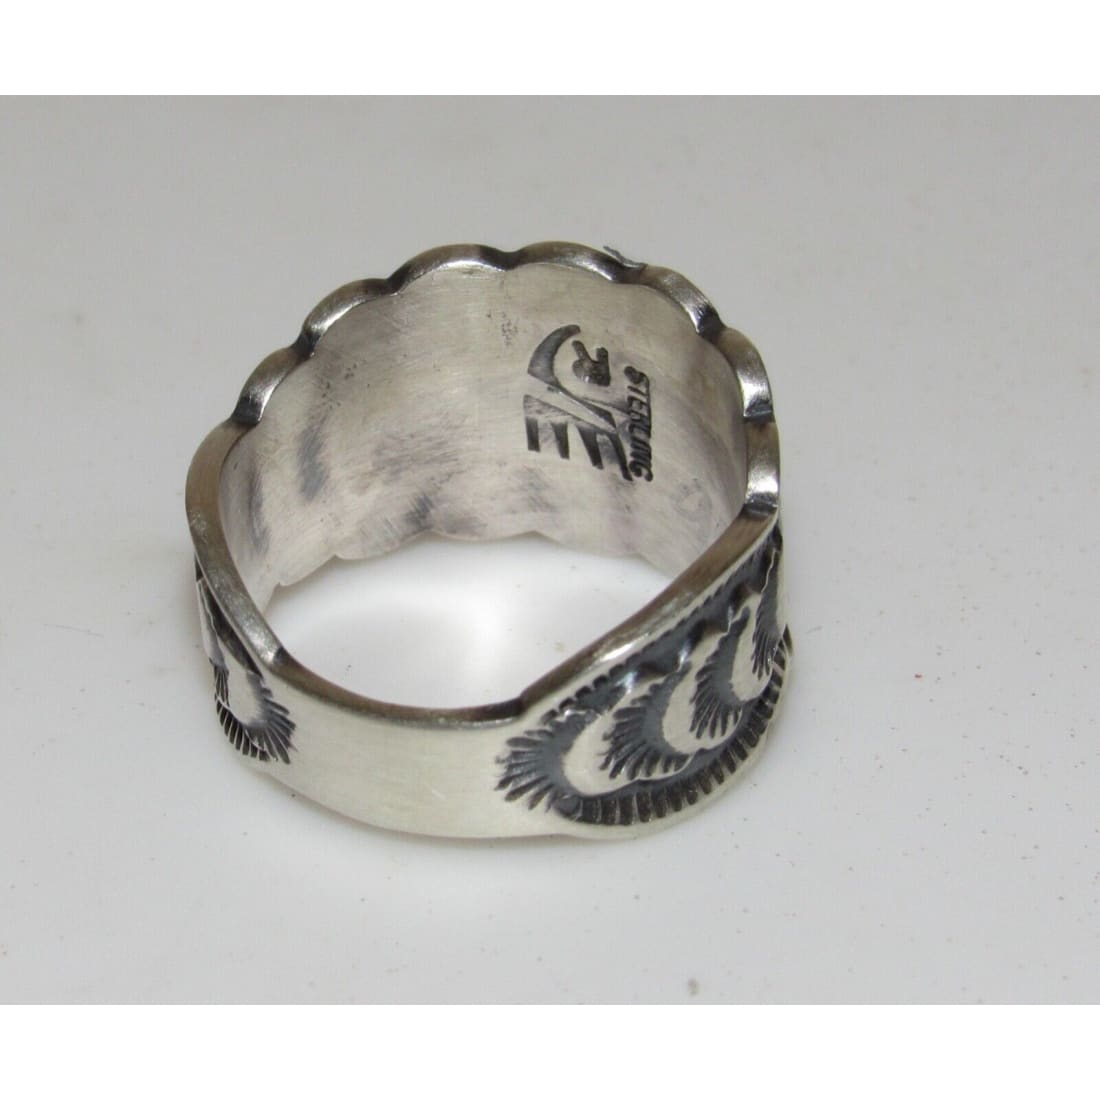 Navajo Band Ring Size 8 Sterling Silver Repousse Band Signed